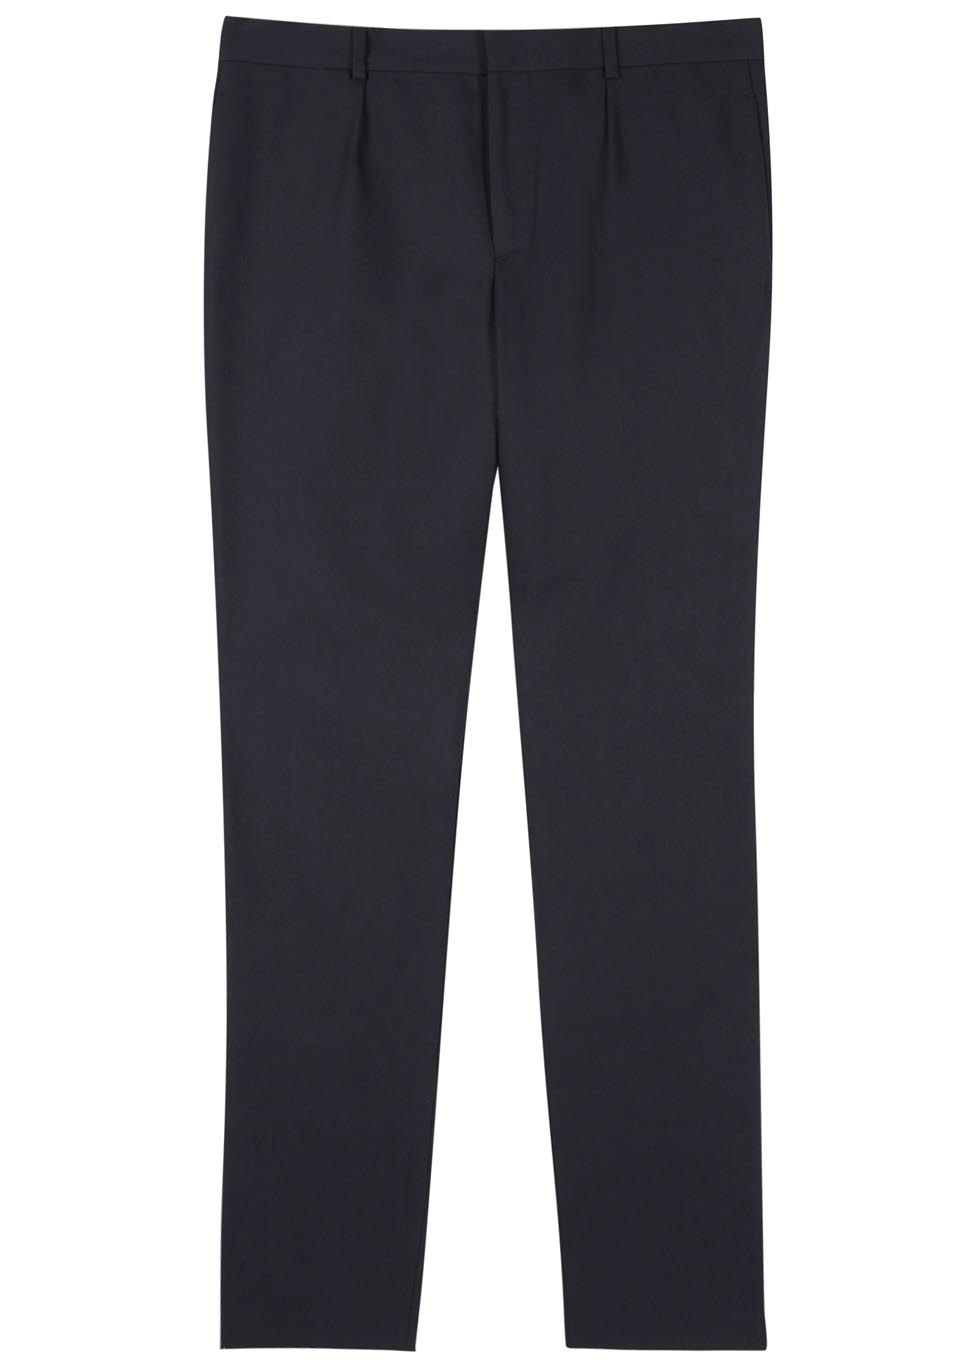 Navy wool blend trousers